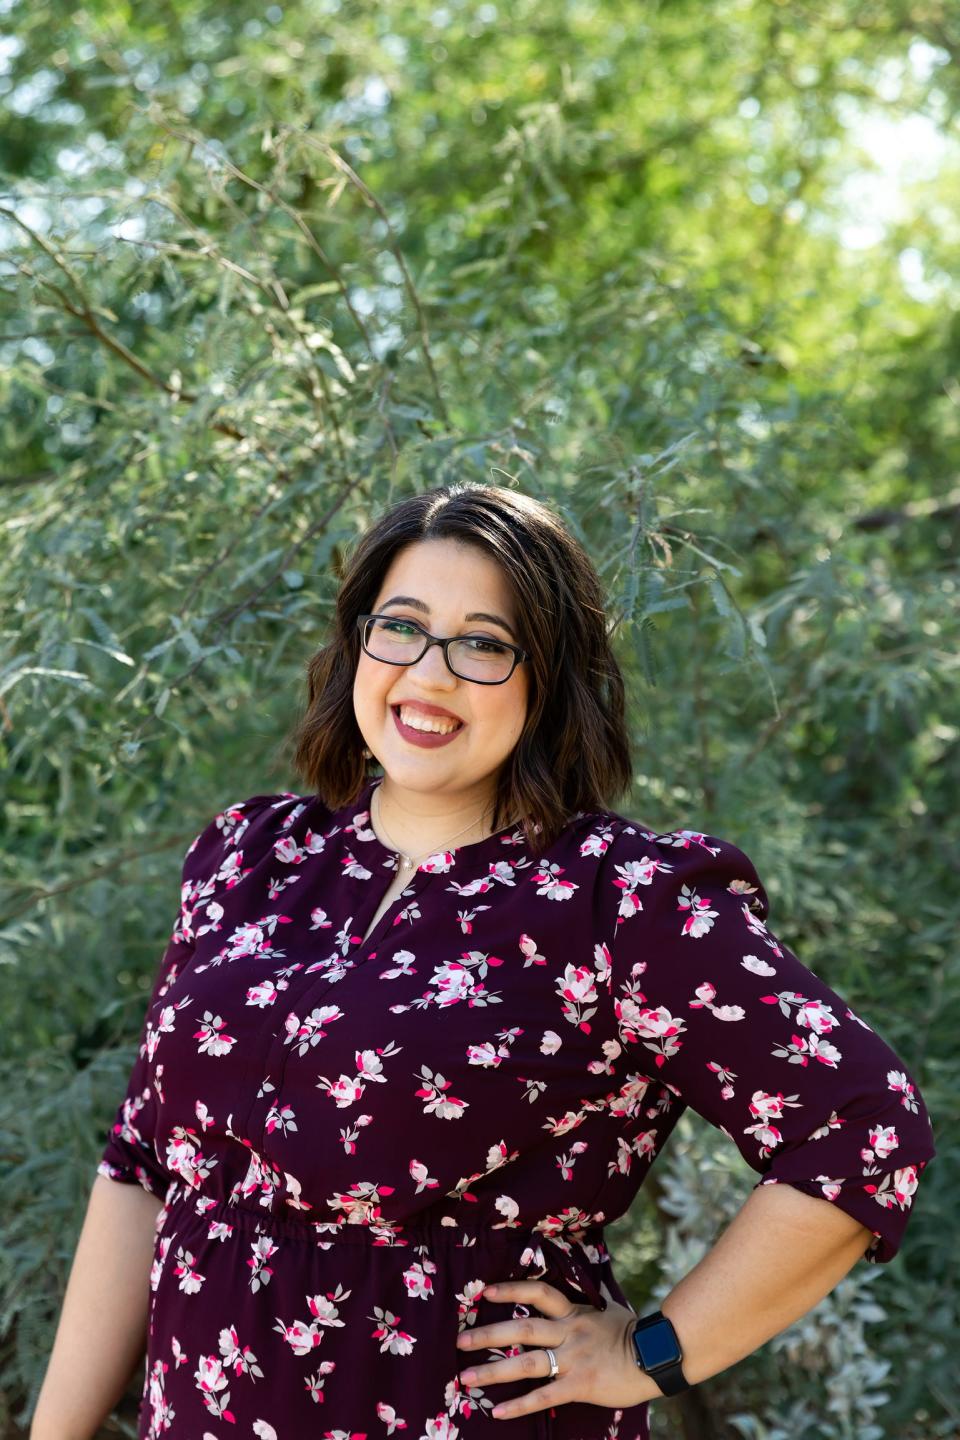 Trista Guzman Glover,  who formerly served as director of the Governor's Office of Boards and Commissions, is running for District 4 on the Mesa City Council.